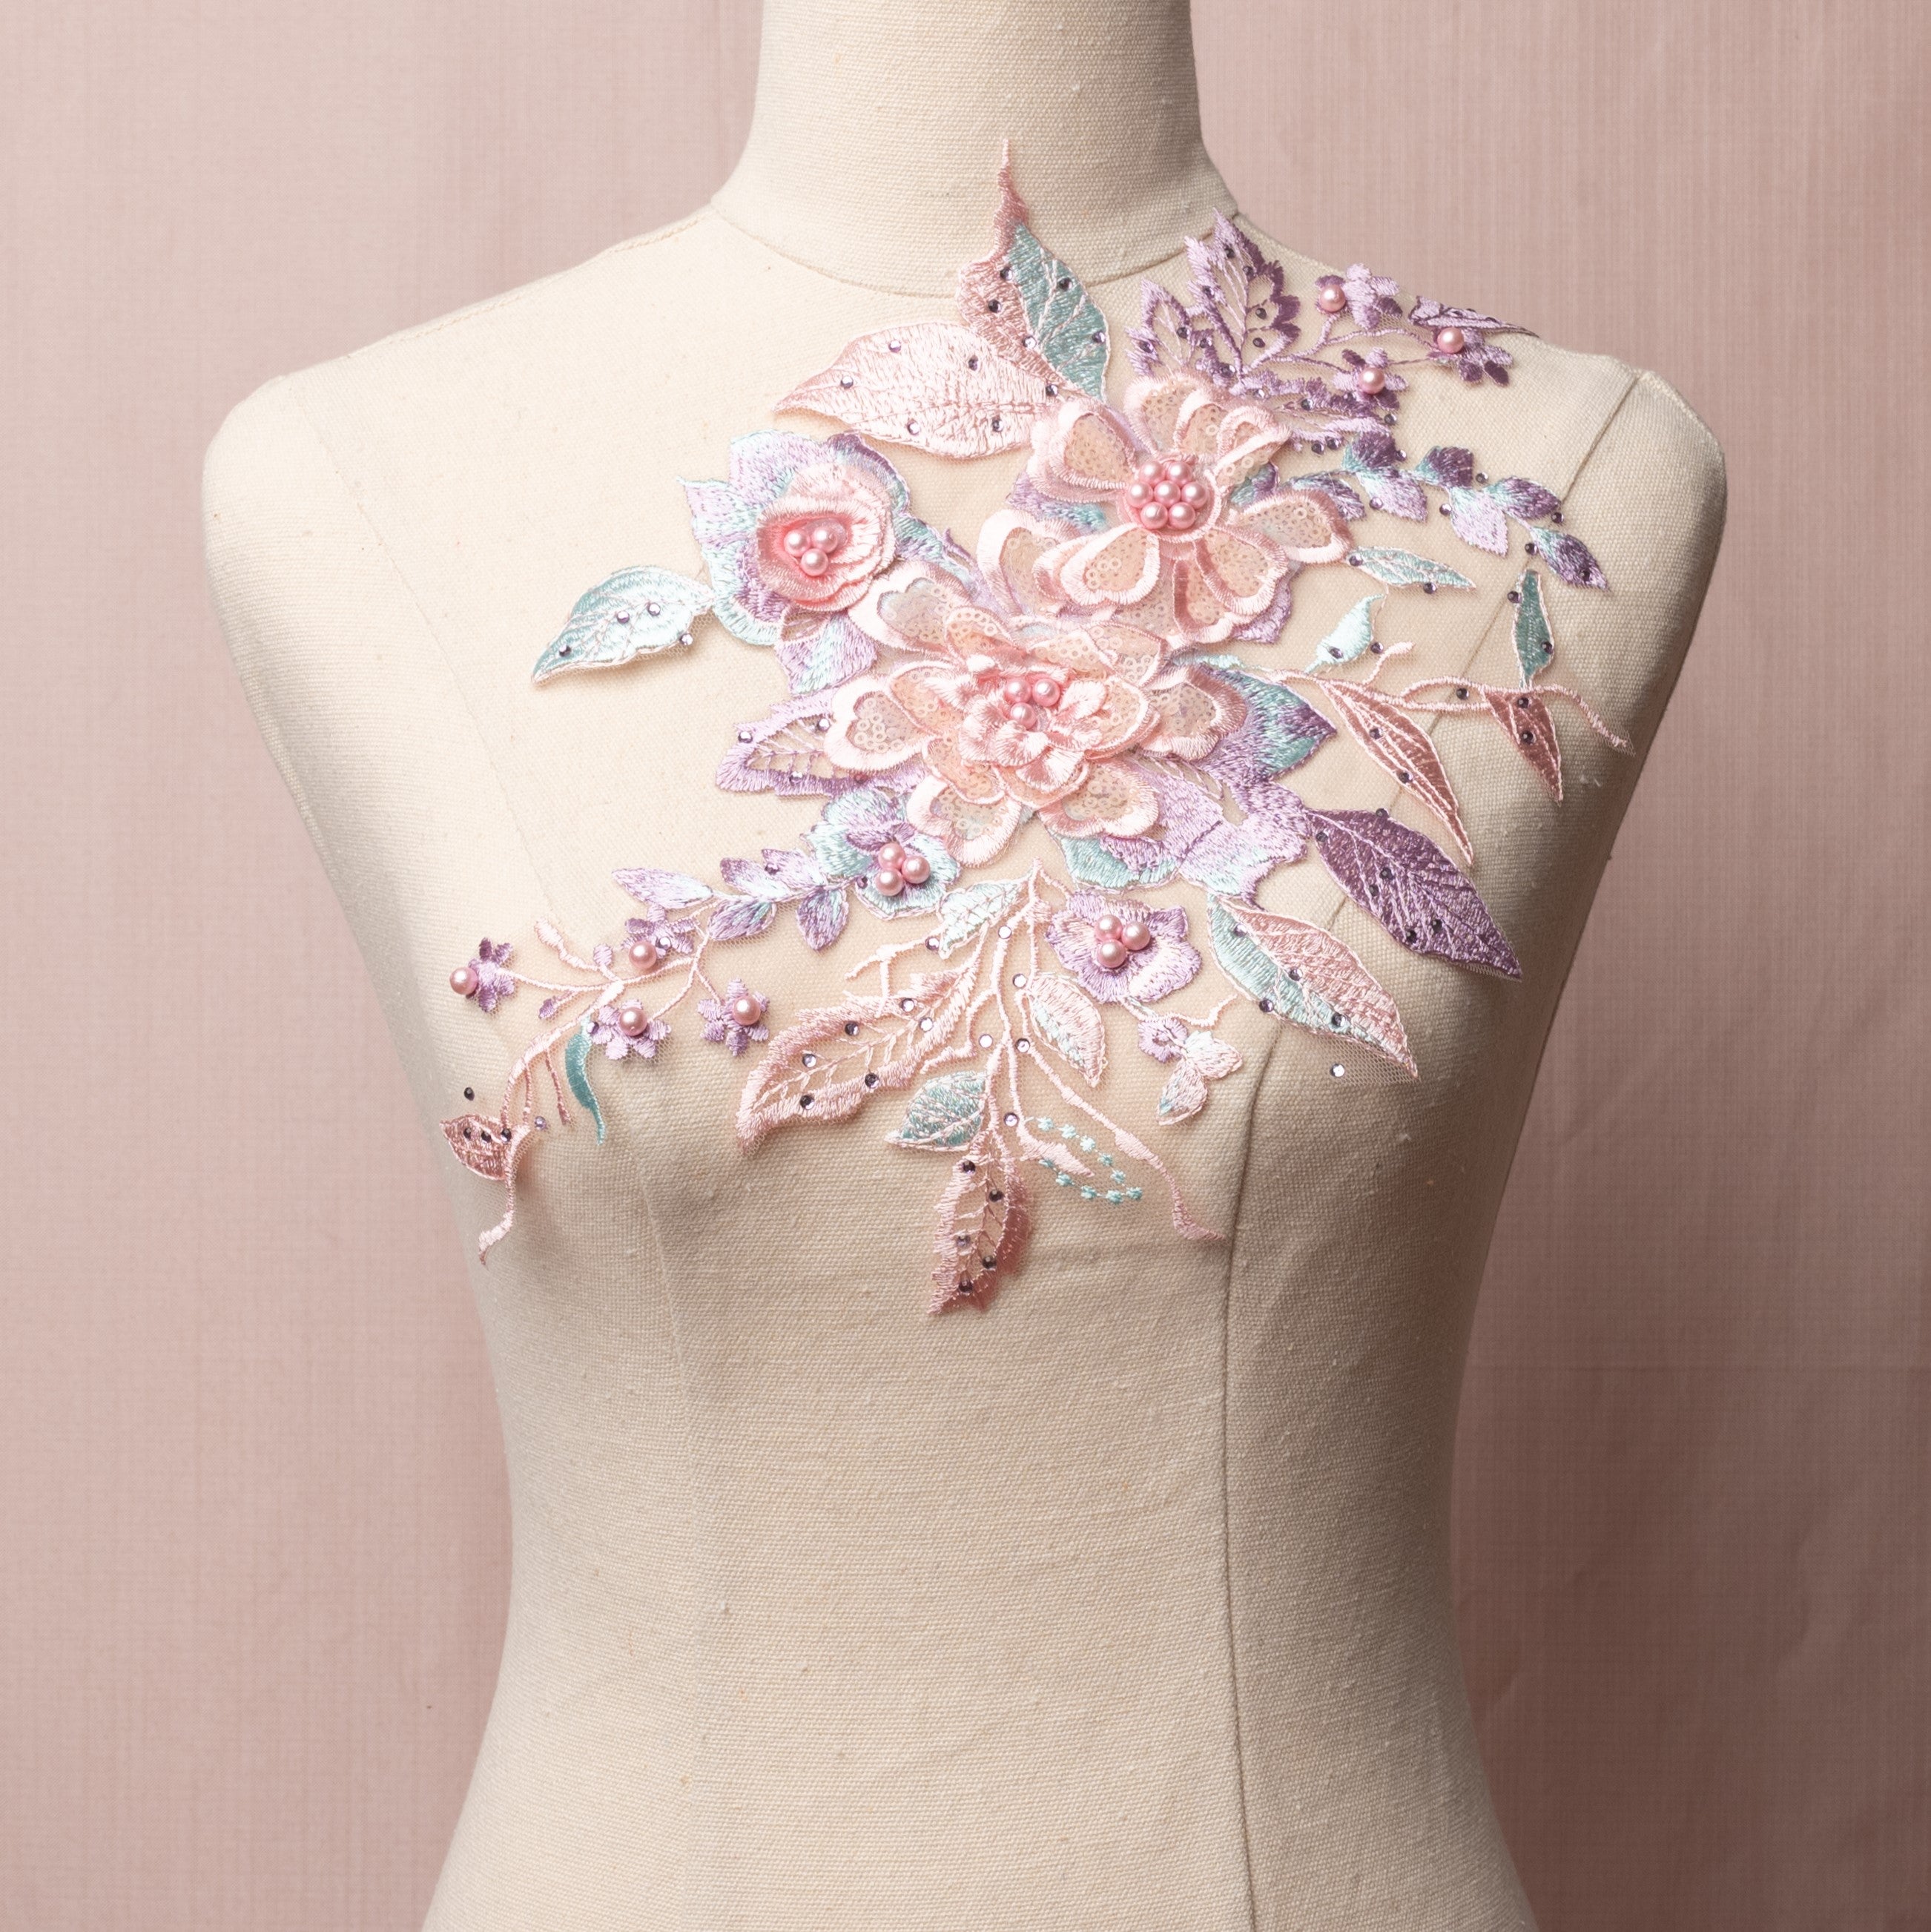 Single 3D floral applique in pastel shades of pink, lavender and green.  The 3D flowers have pearl centers and sequinned petals.  The applique is sprinkled with purple gems and is displayed on a mannequin.